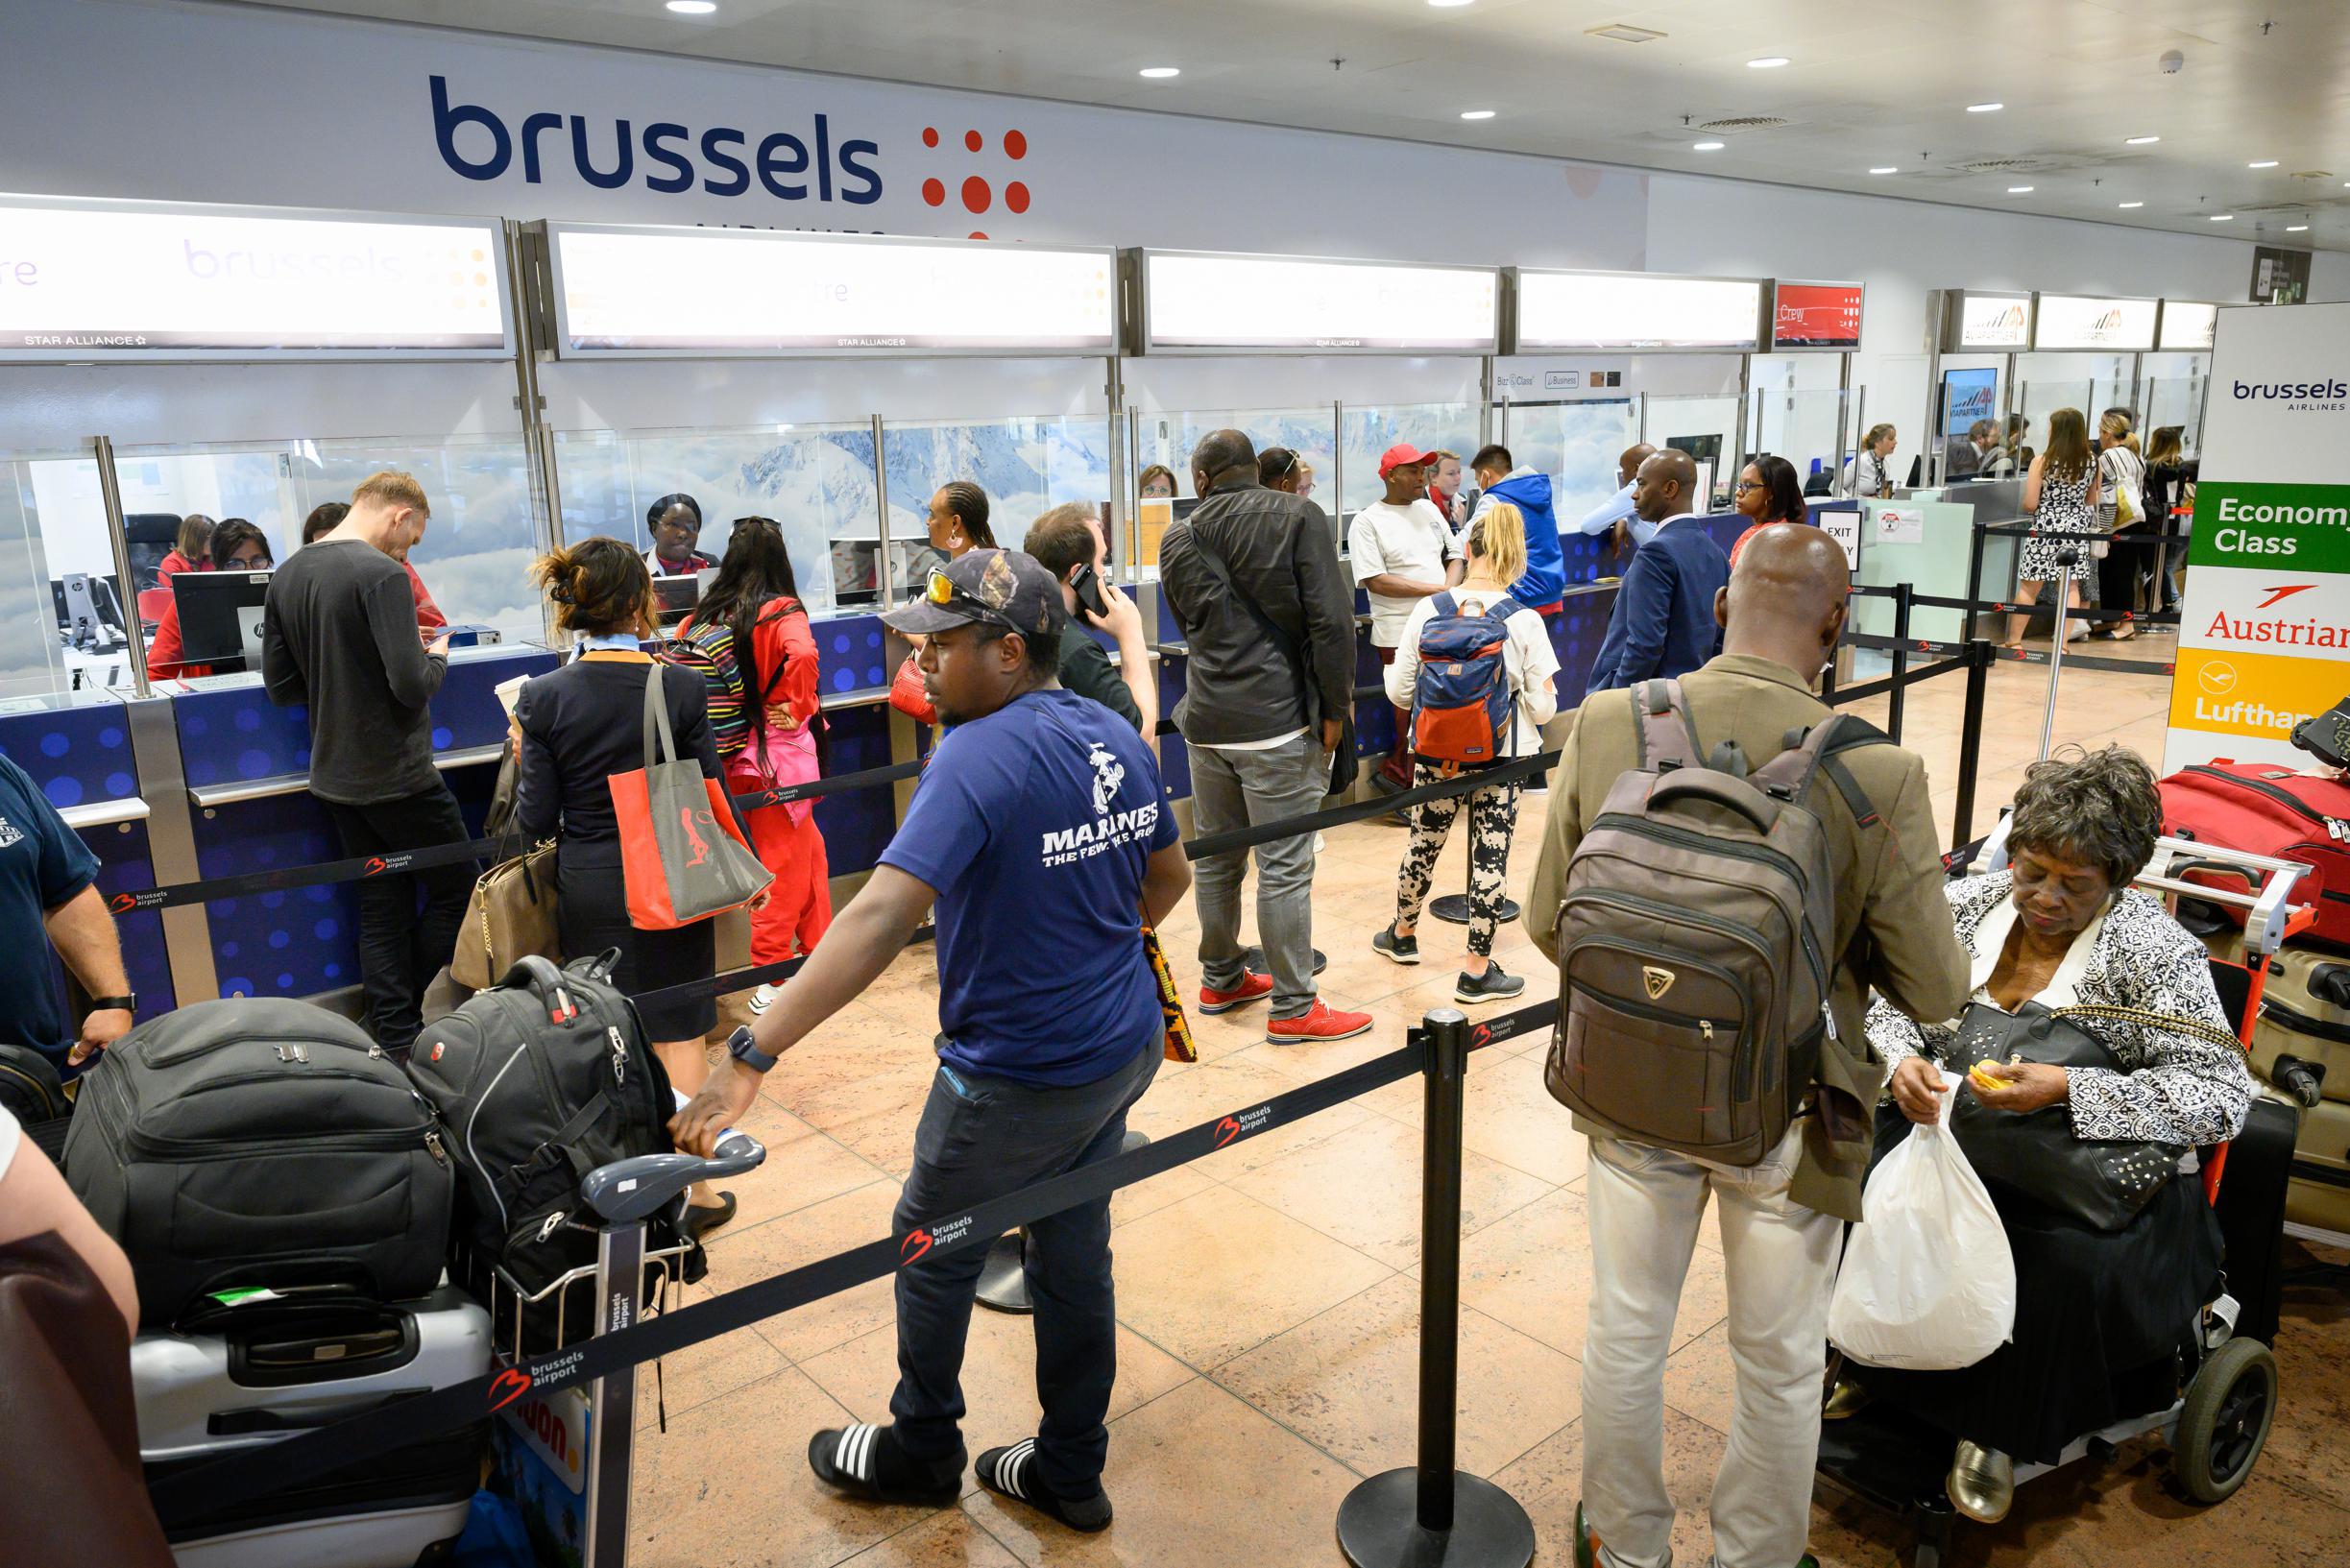 Brussels Airlines employees plan another three-day strike, citing feeling disrespected, ignored and frustrated